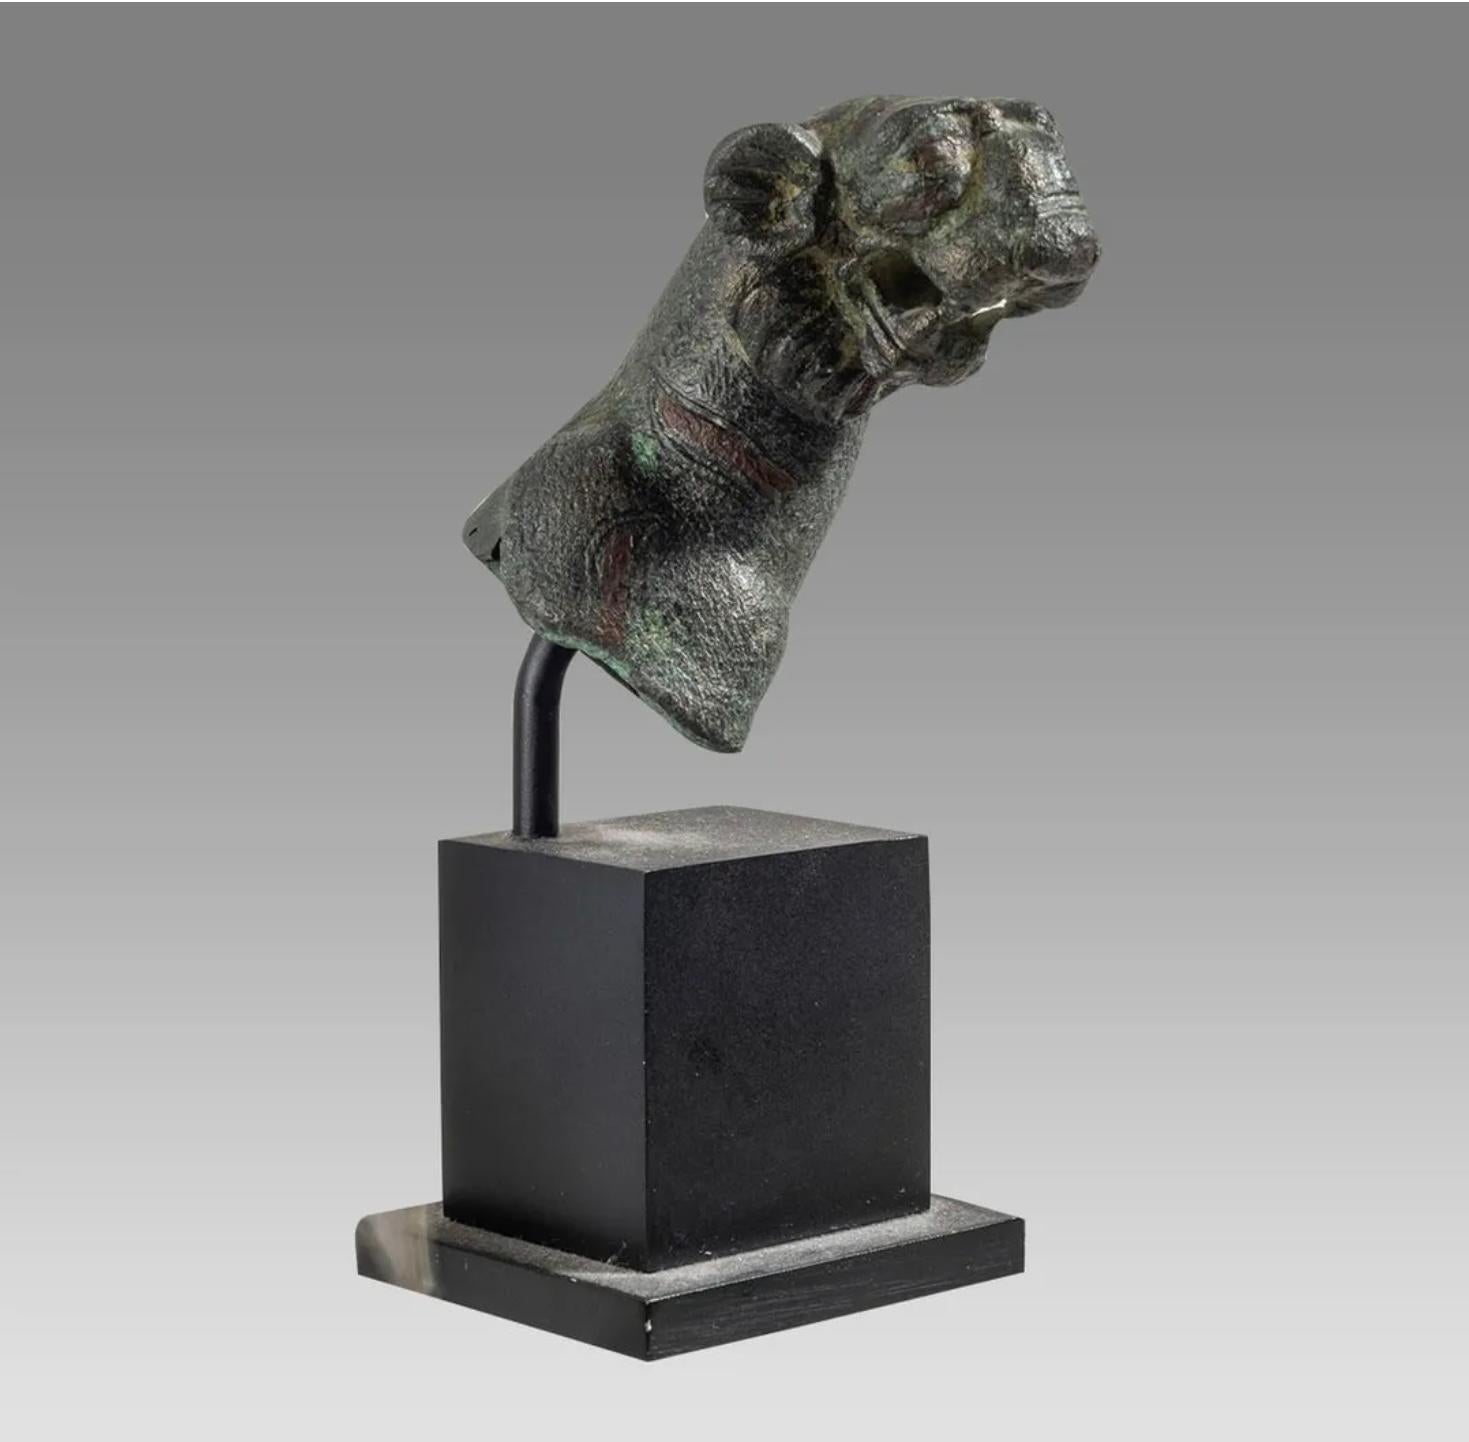 This is a very fine Ancient Roman Bronze Tiger Head dating to the 1st-2nd century AD.   The Ancient Roman cast bronze head of the Tiger has extremely fine quality casting and superb details. The head of the tiger itself is 2 1/2 inches tall and is